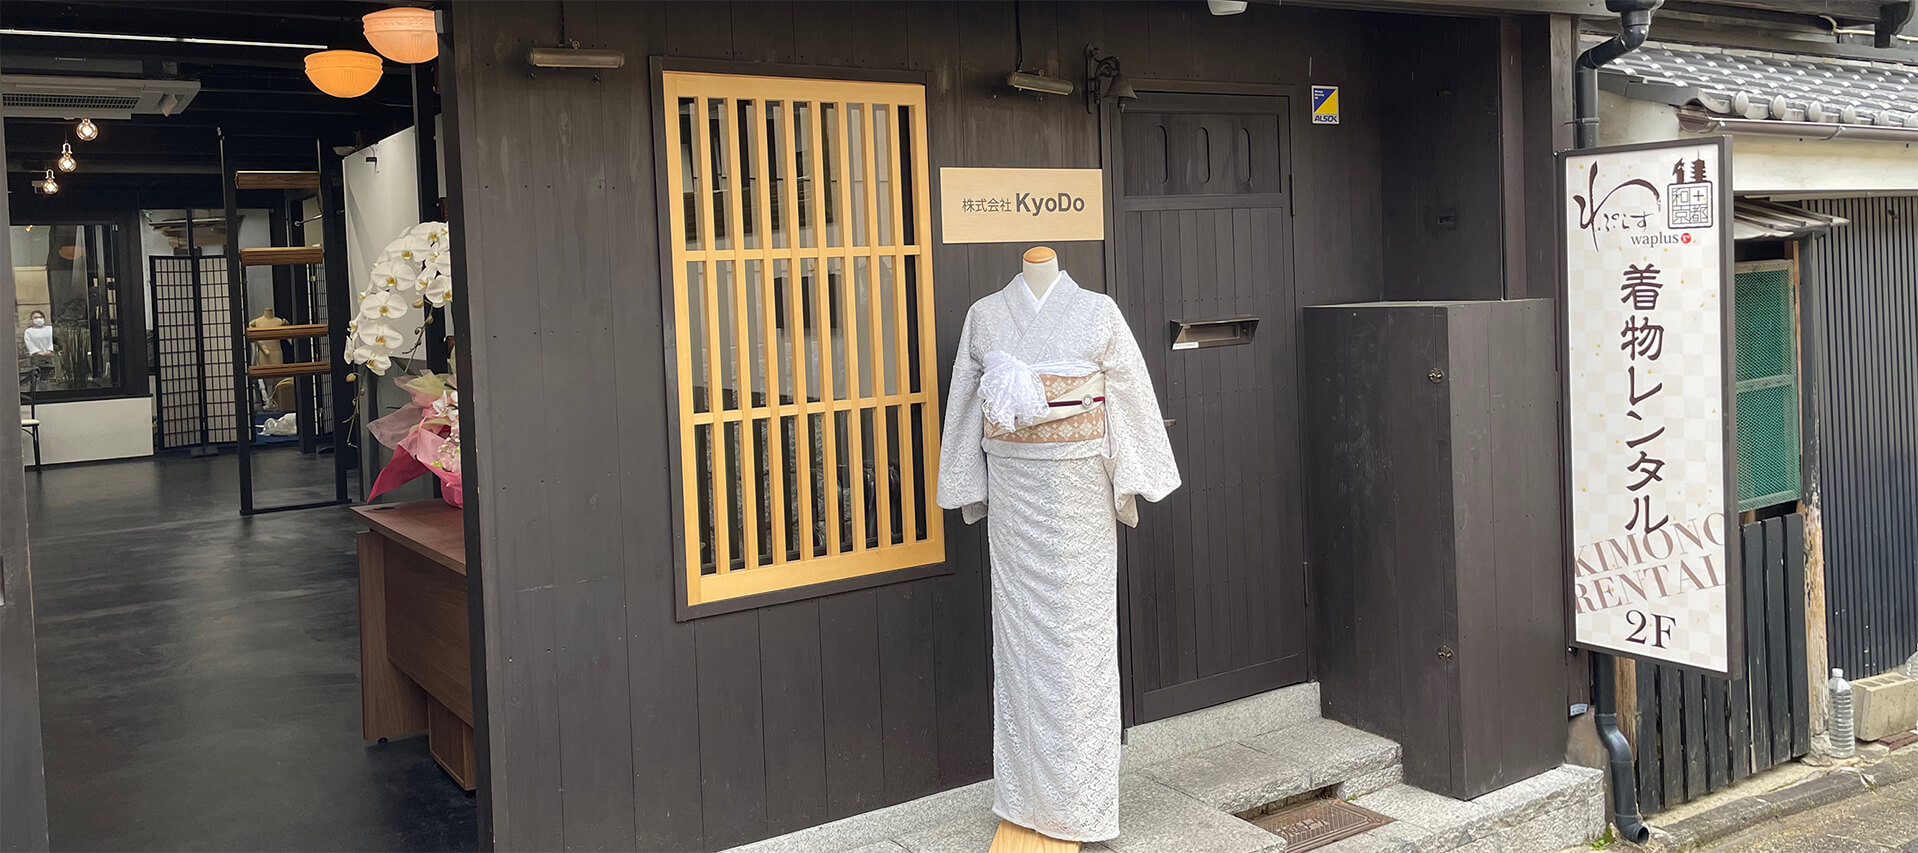 Inside a Japanese Building Constructed 170 Years Ago, Feel the Quaintness of Old Japan While Getting Dressed